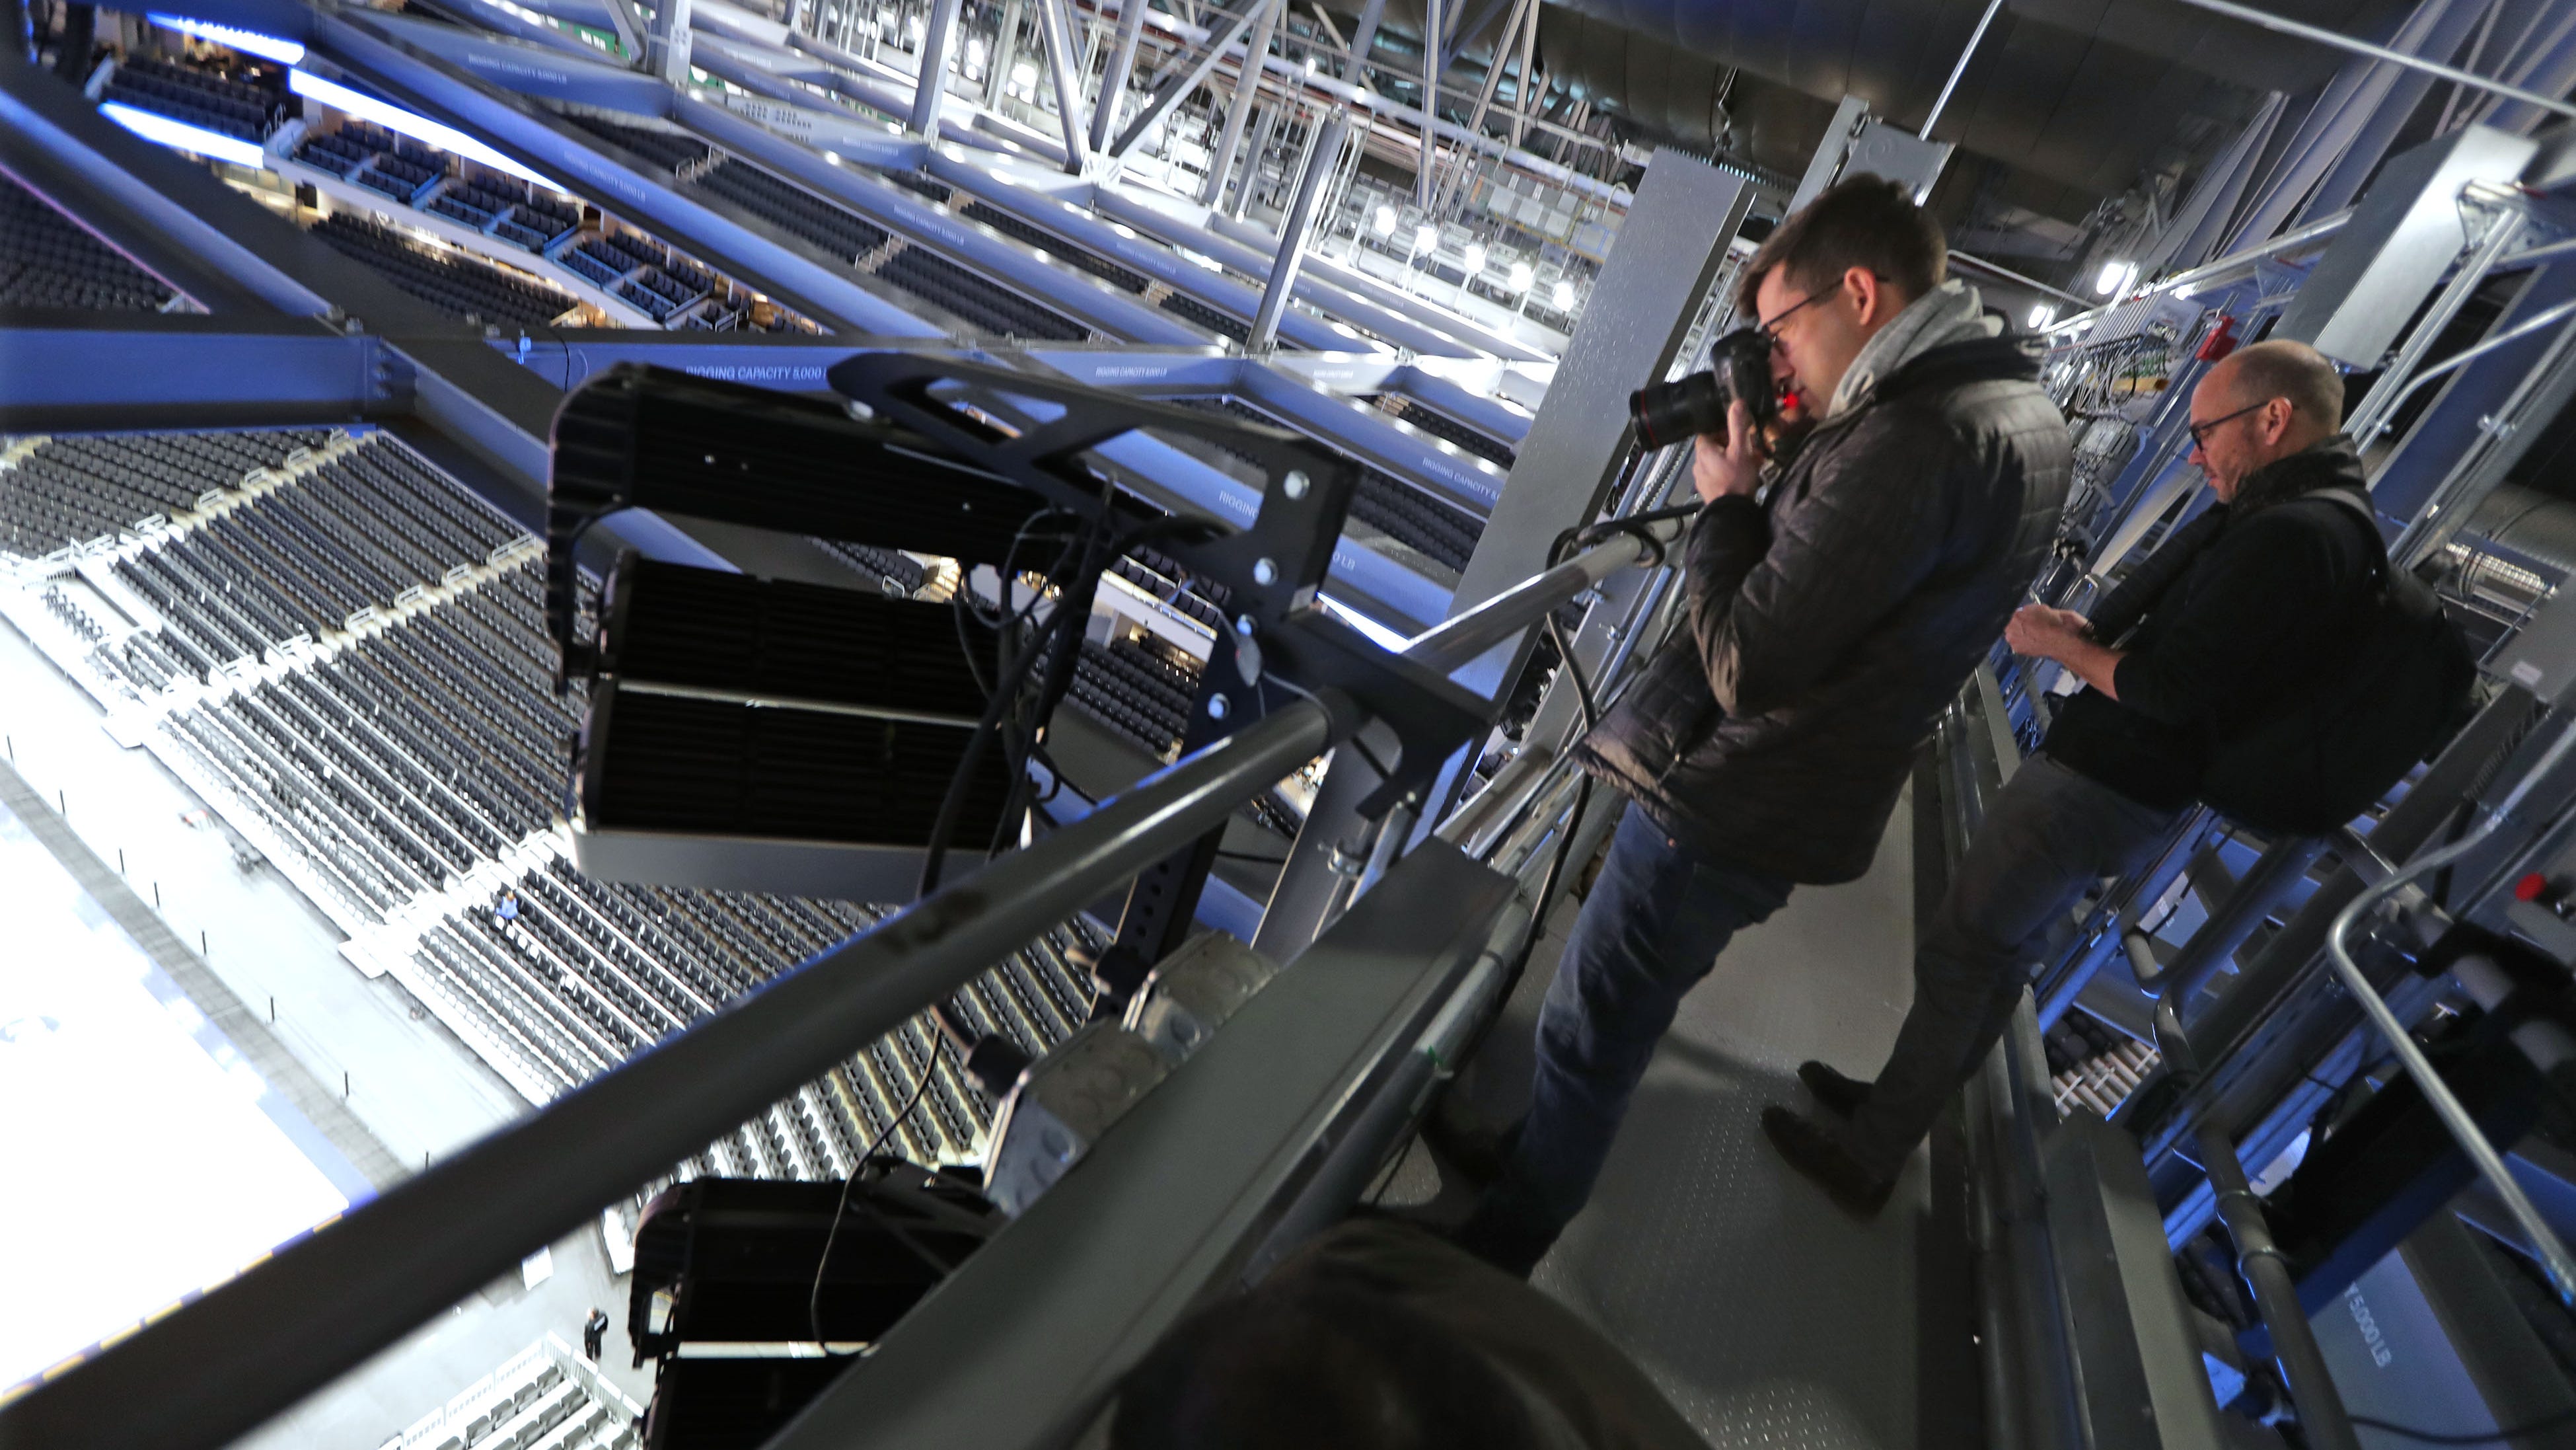 Members of the media get a look at  Fiserv Forum from the catwalk during a tour as part of the 2020 Democratic National Convention winter media walk-through on Tuesday.